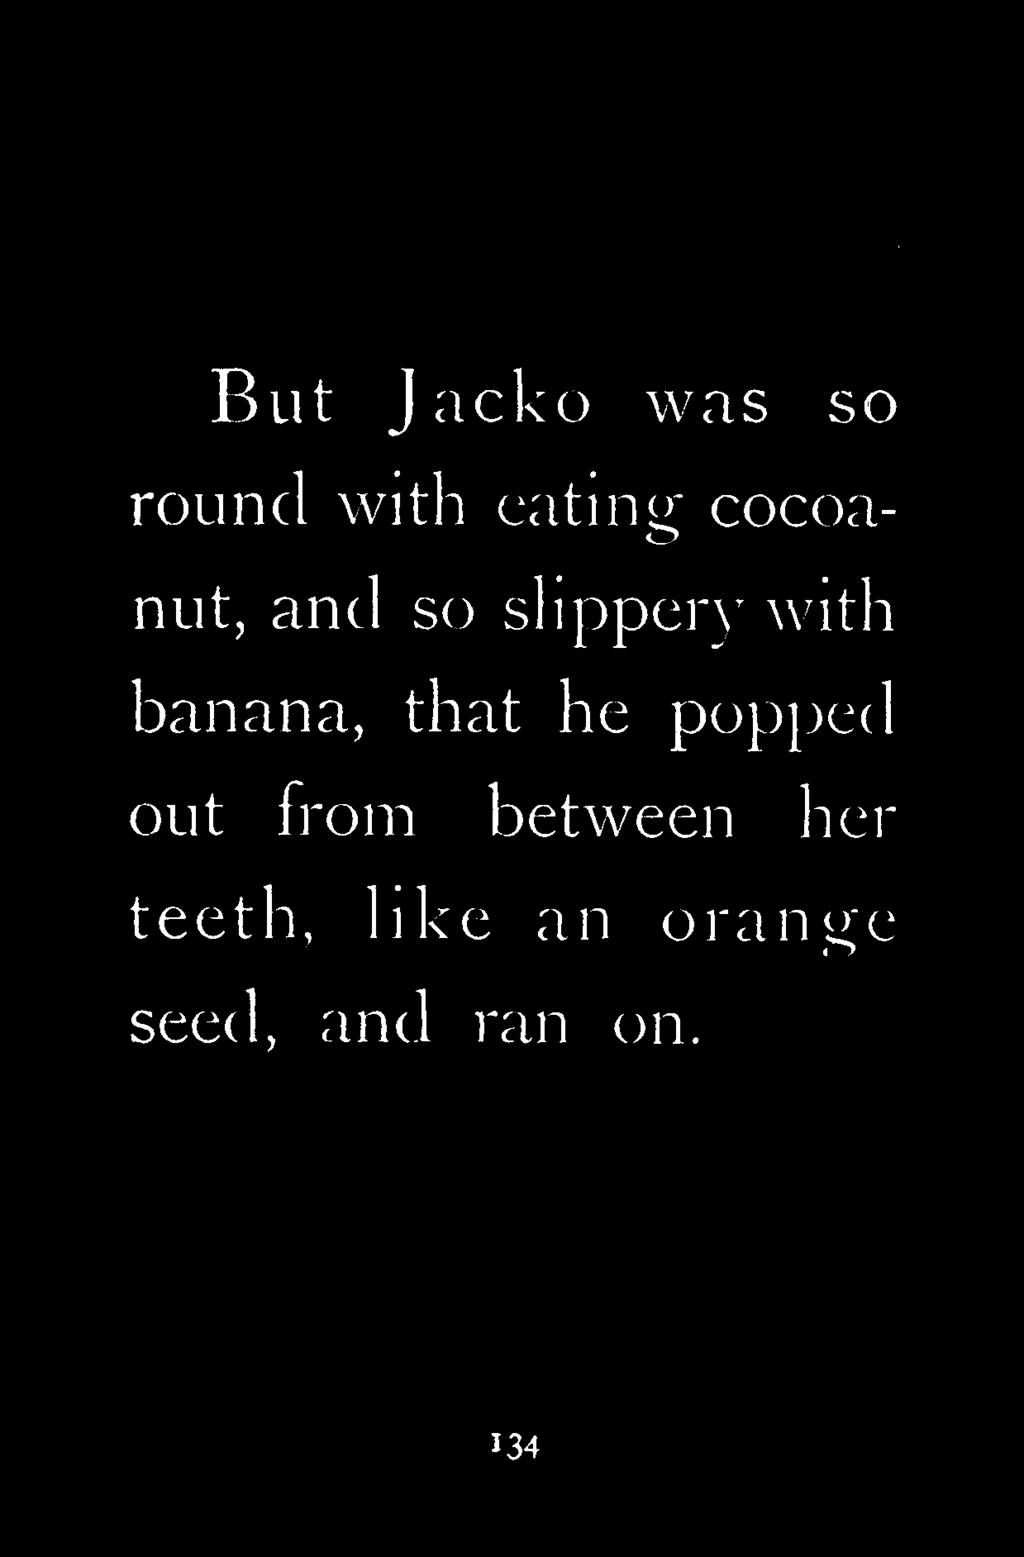 But J acko was so round with eating cocoanut, and so slippery with banana,